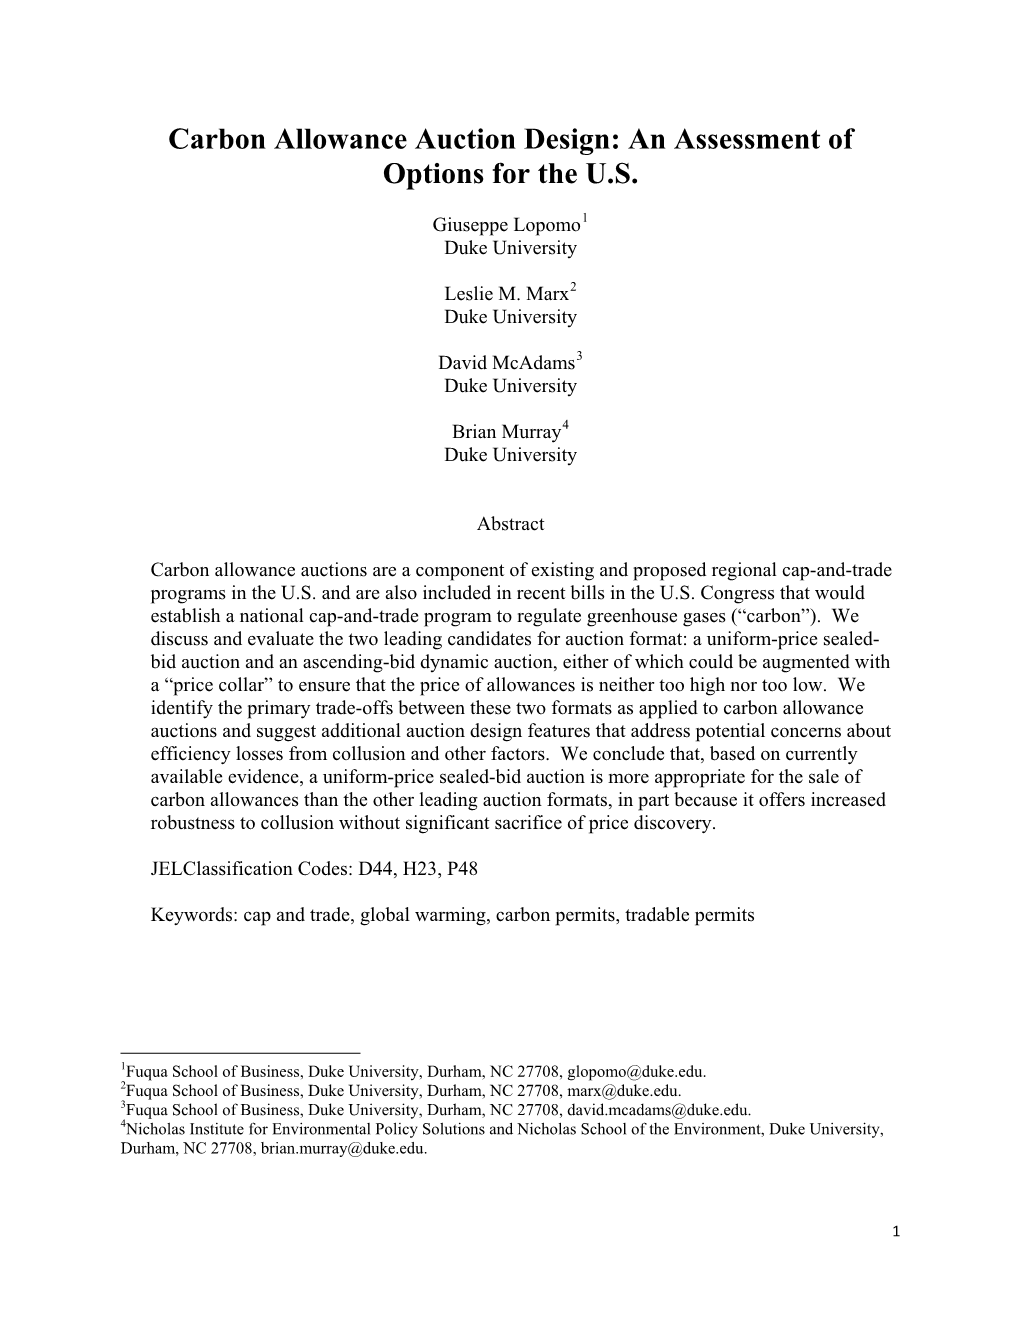 Carbon Allowance Auction Design: an Assessment of Options for the U.S